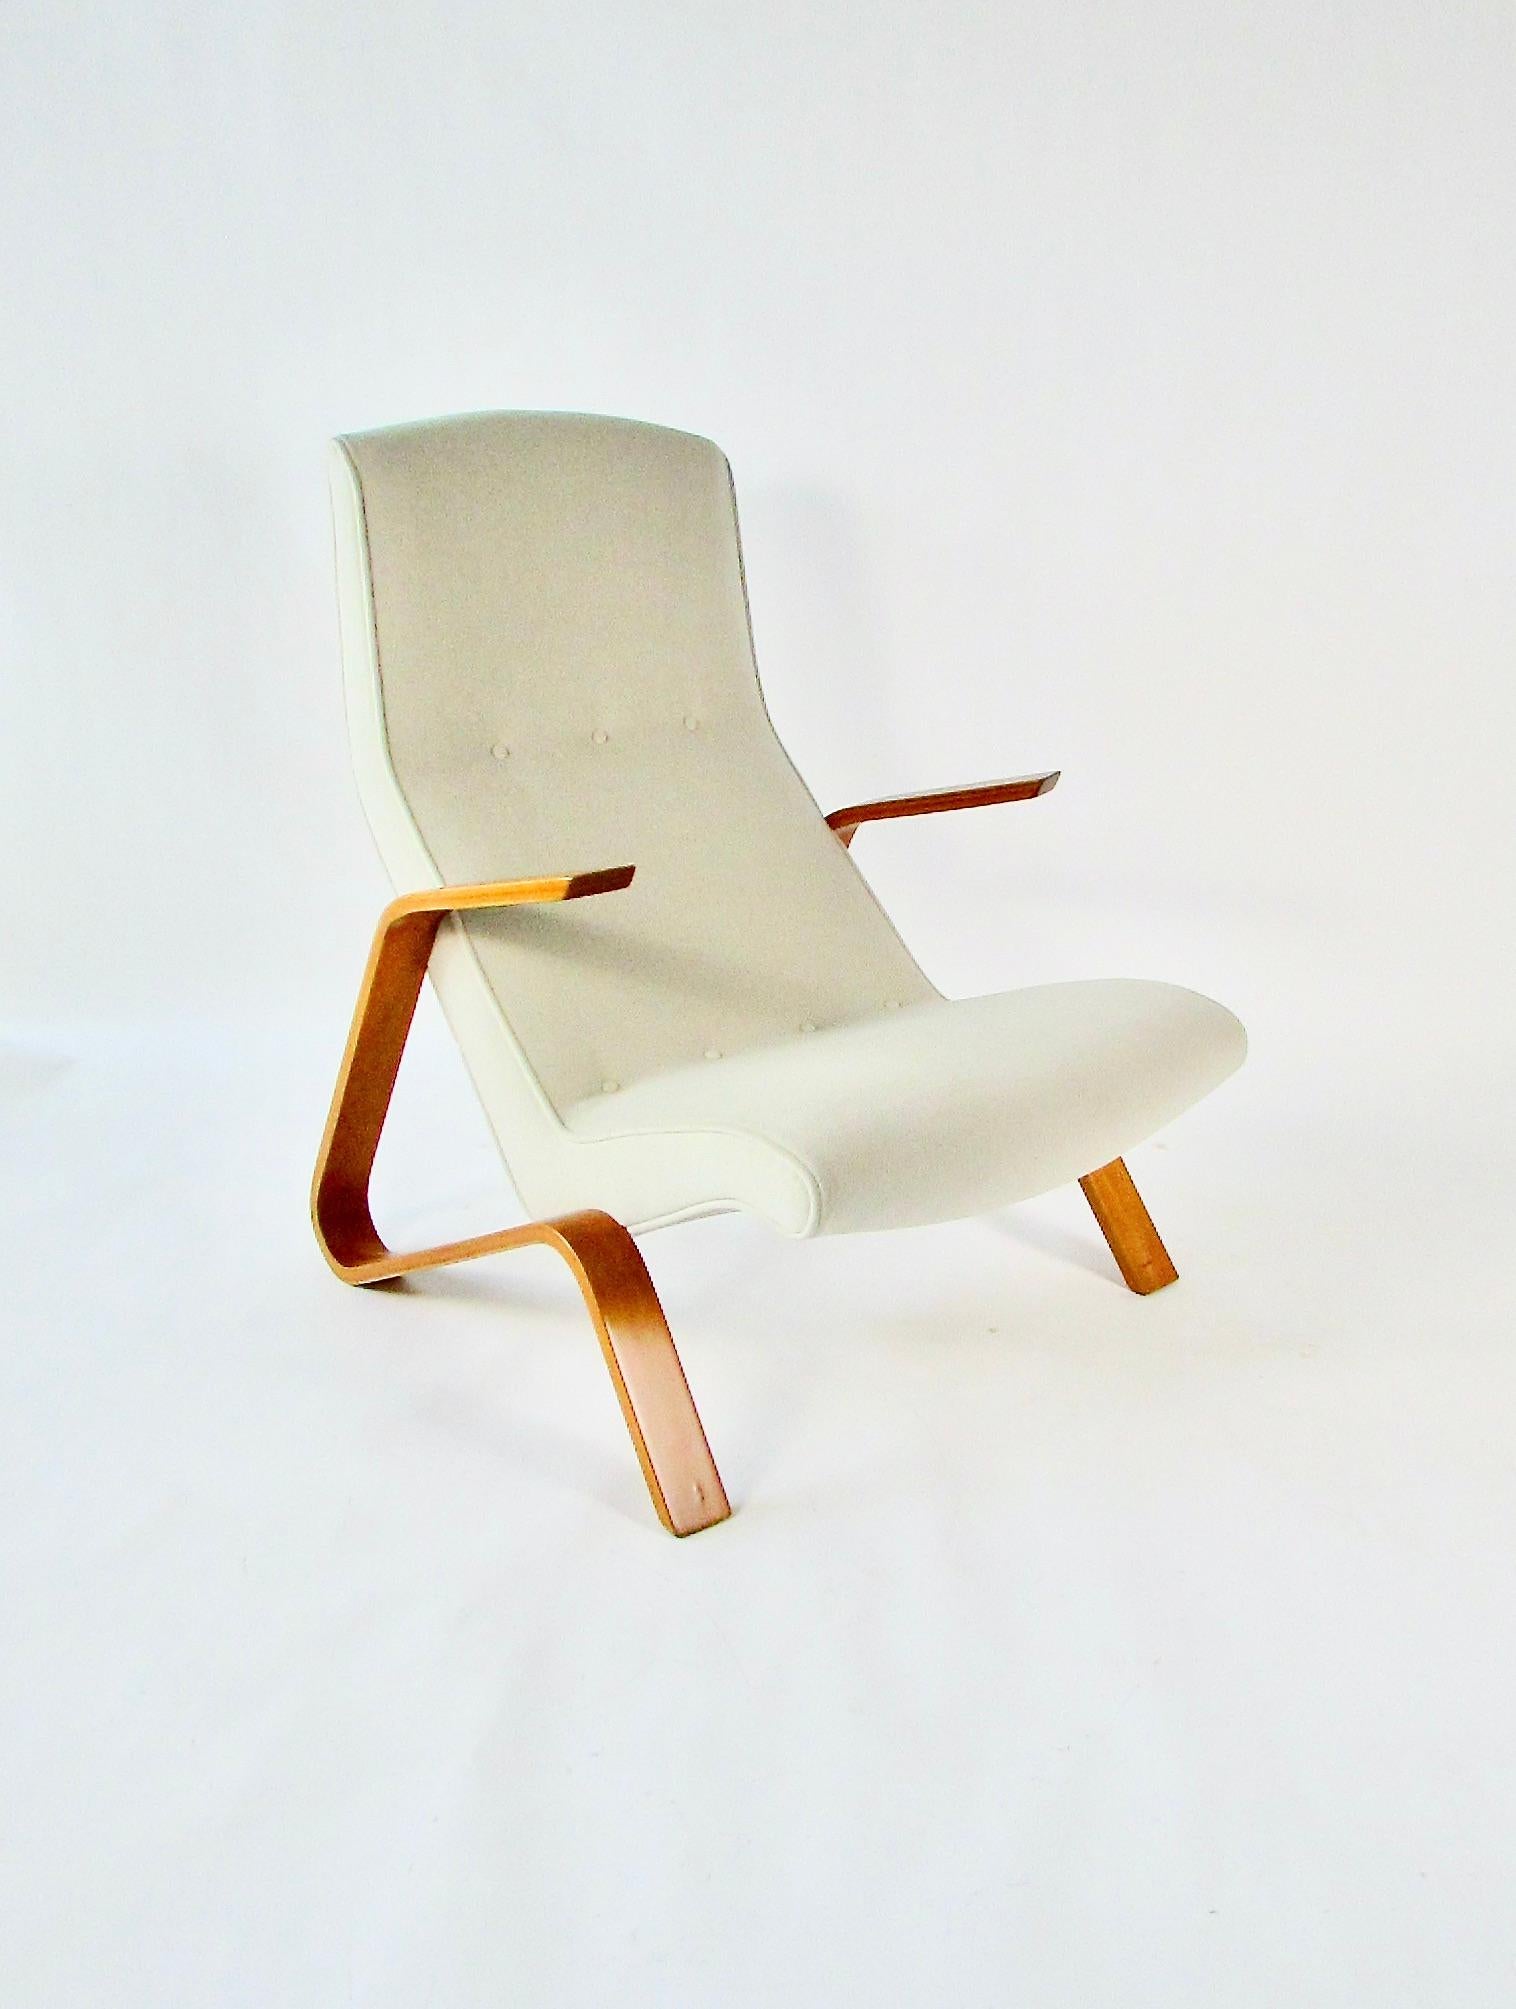 Lacquered Properly Restored Early Production Eero Saarinen Grasshopper Chair for Knoll For Sale